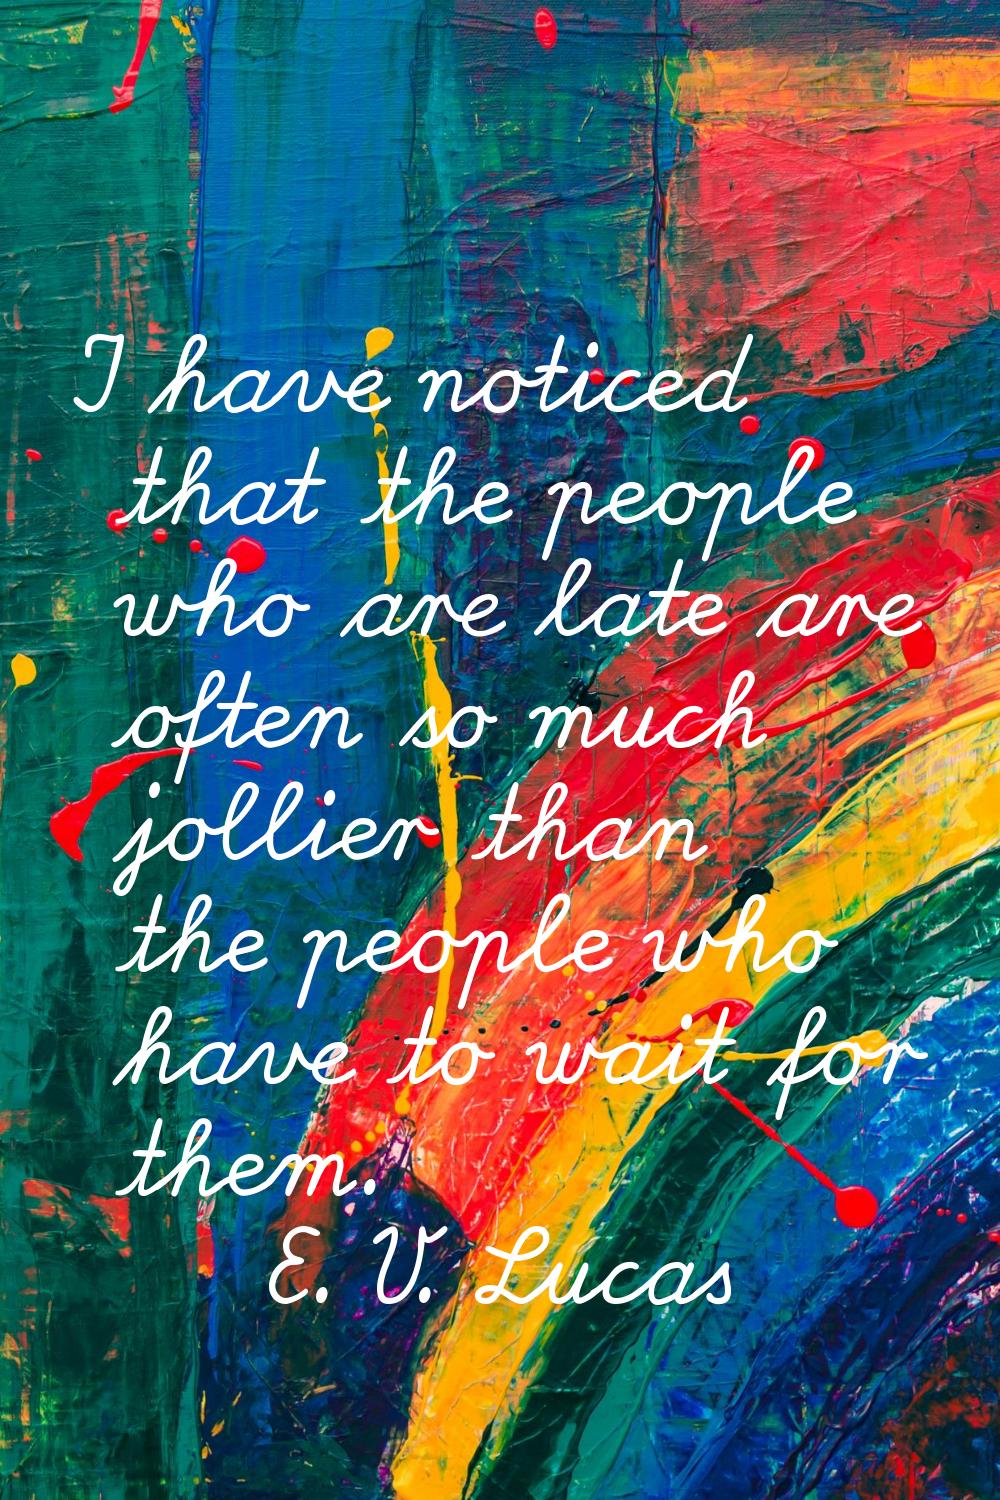 I have noticed that the people who are late are often so much jollier than the people who have to w